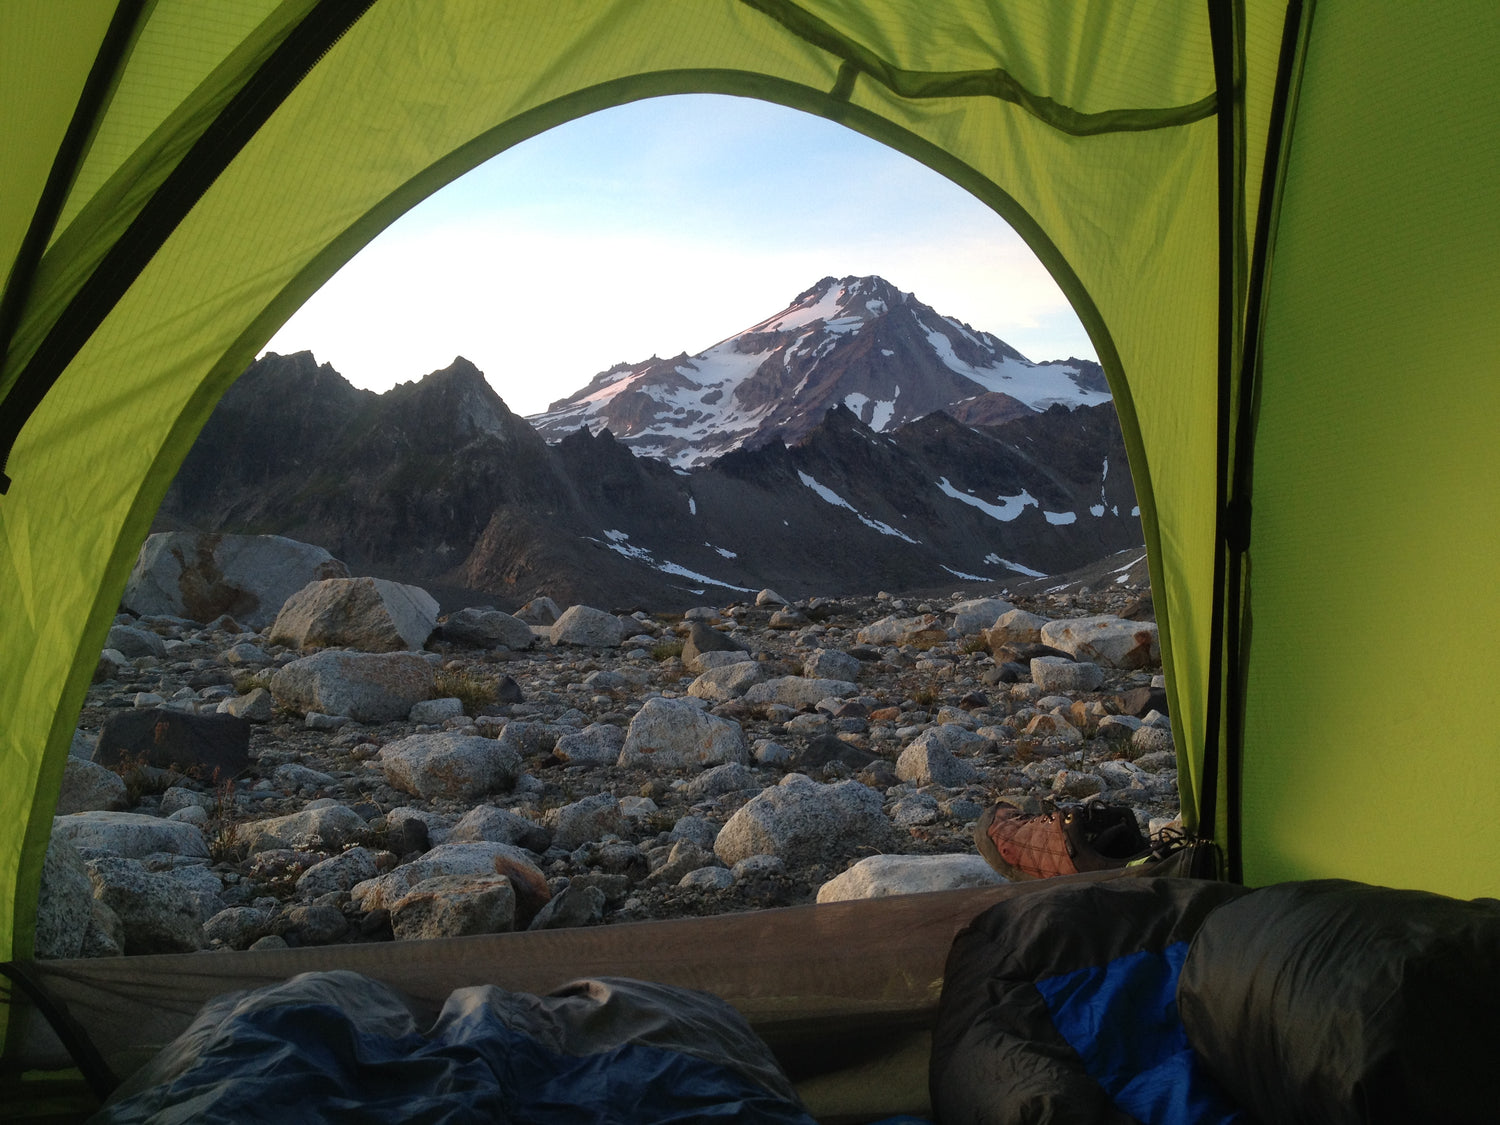 View of Glacier peak from inside a tent.